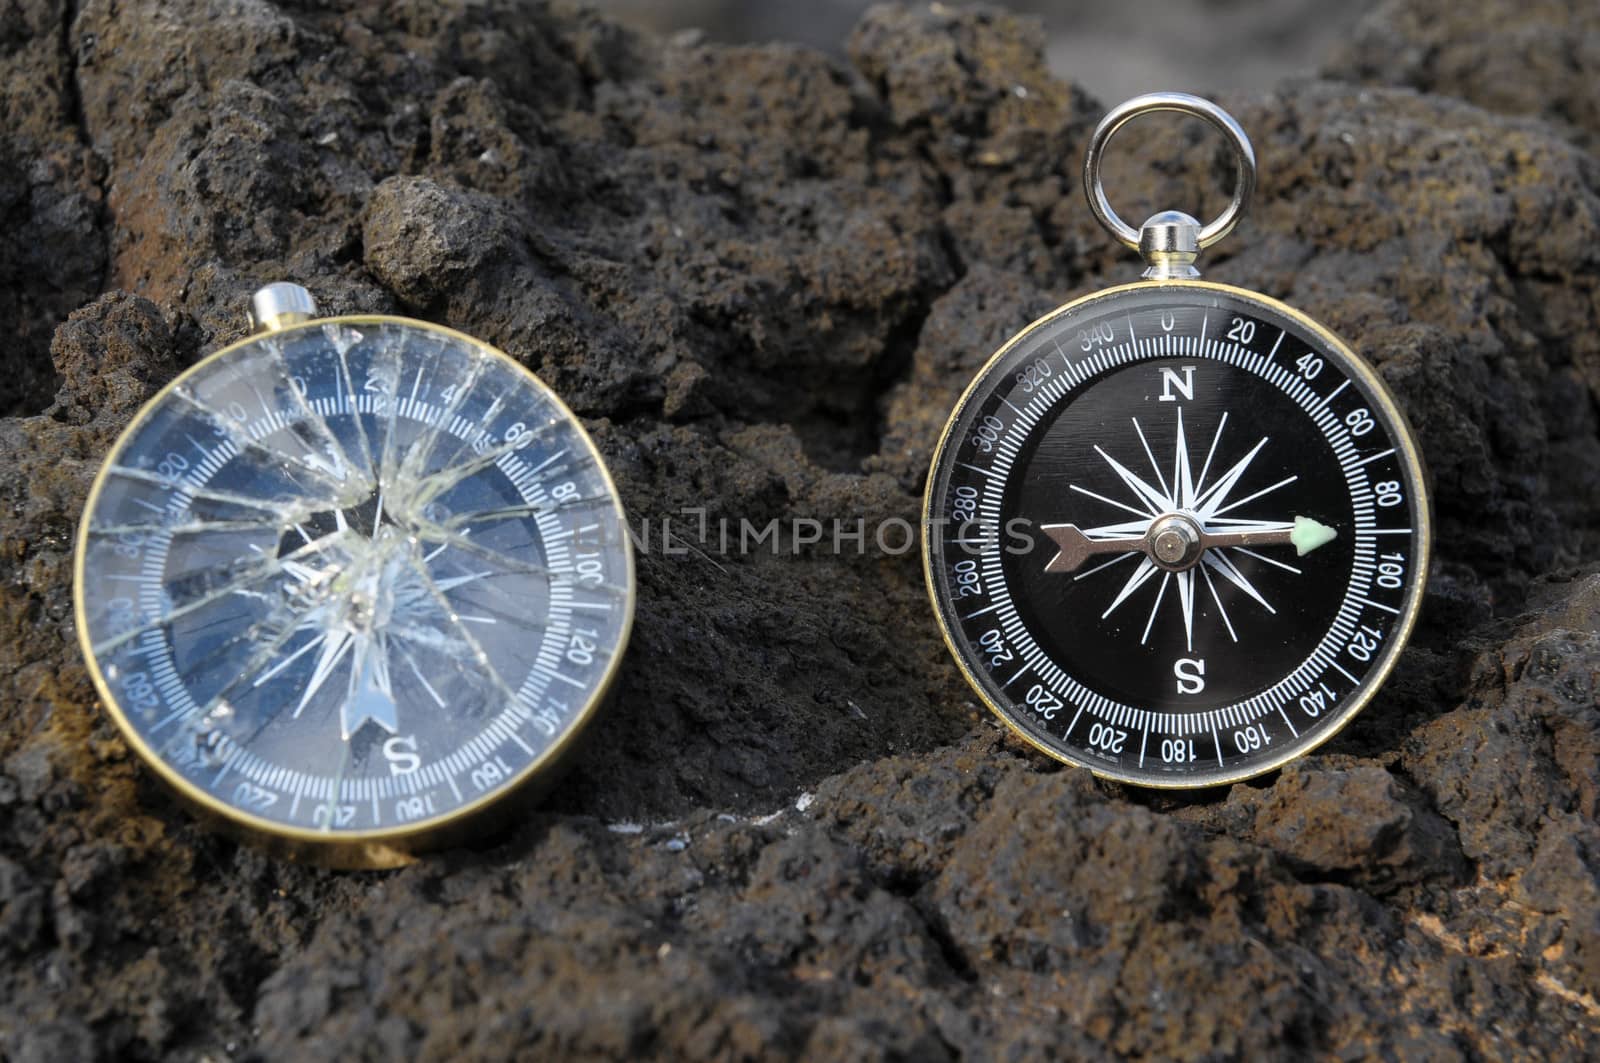 Orientation Concept - Analogic Compass Abandoned on the Rocks